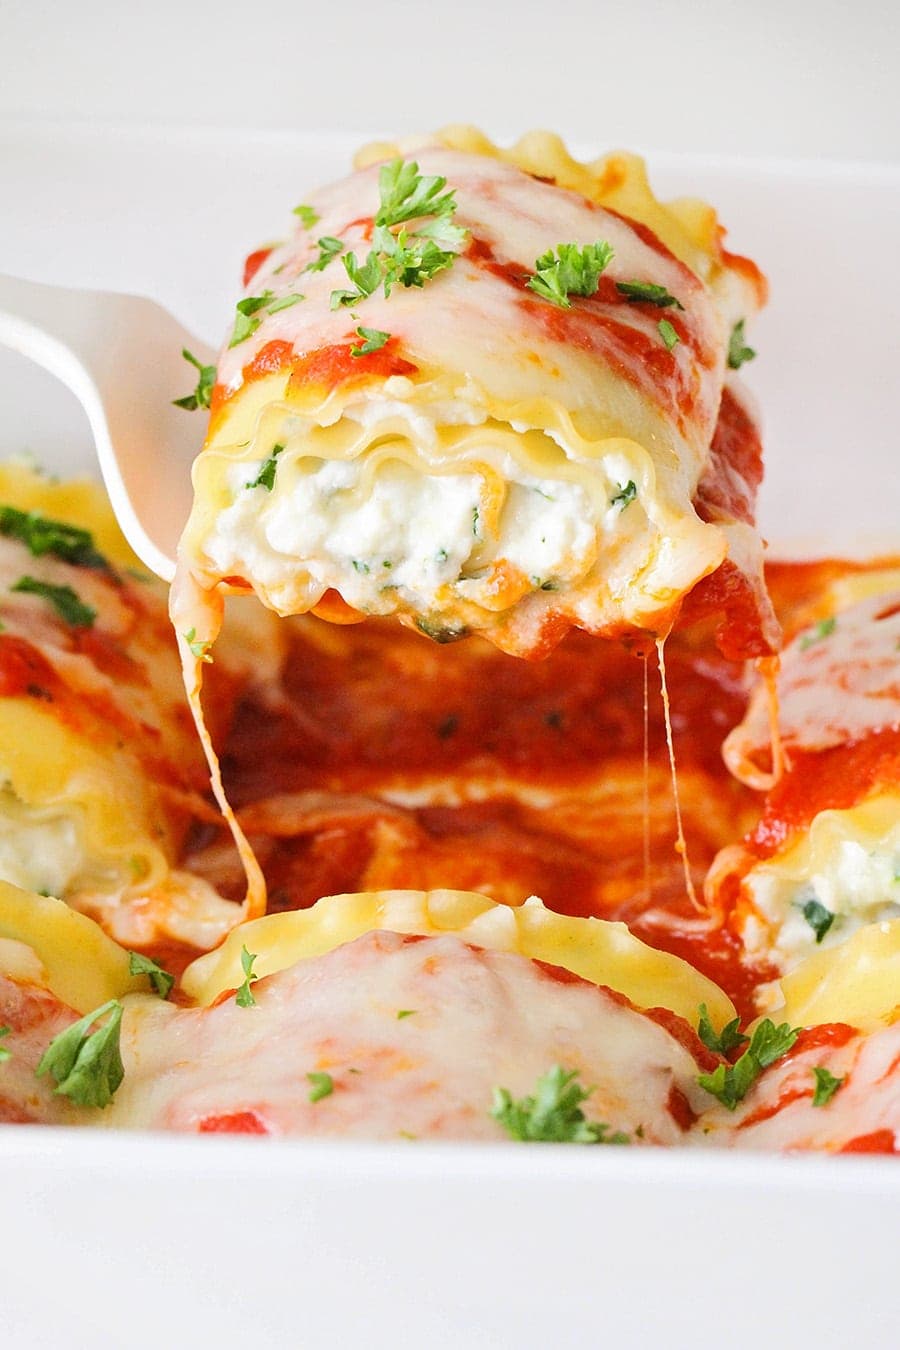 Spinach Lasagna Rolls being scooped with a serving spatula.